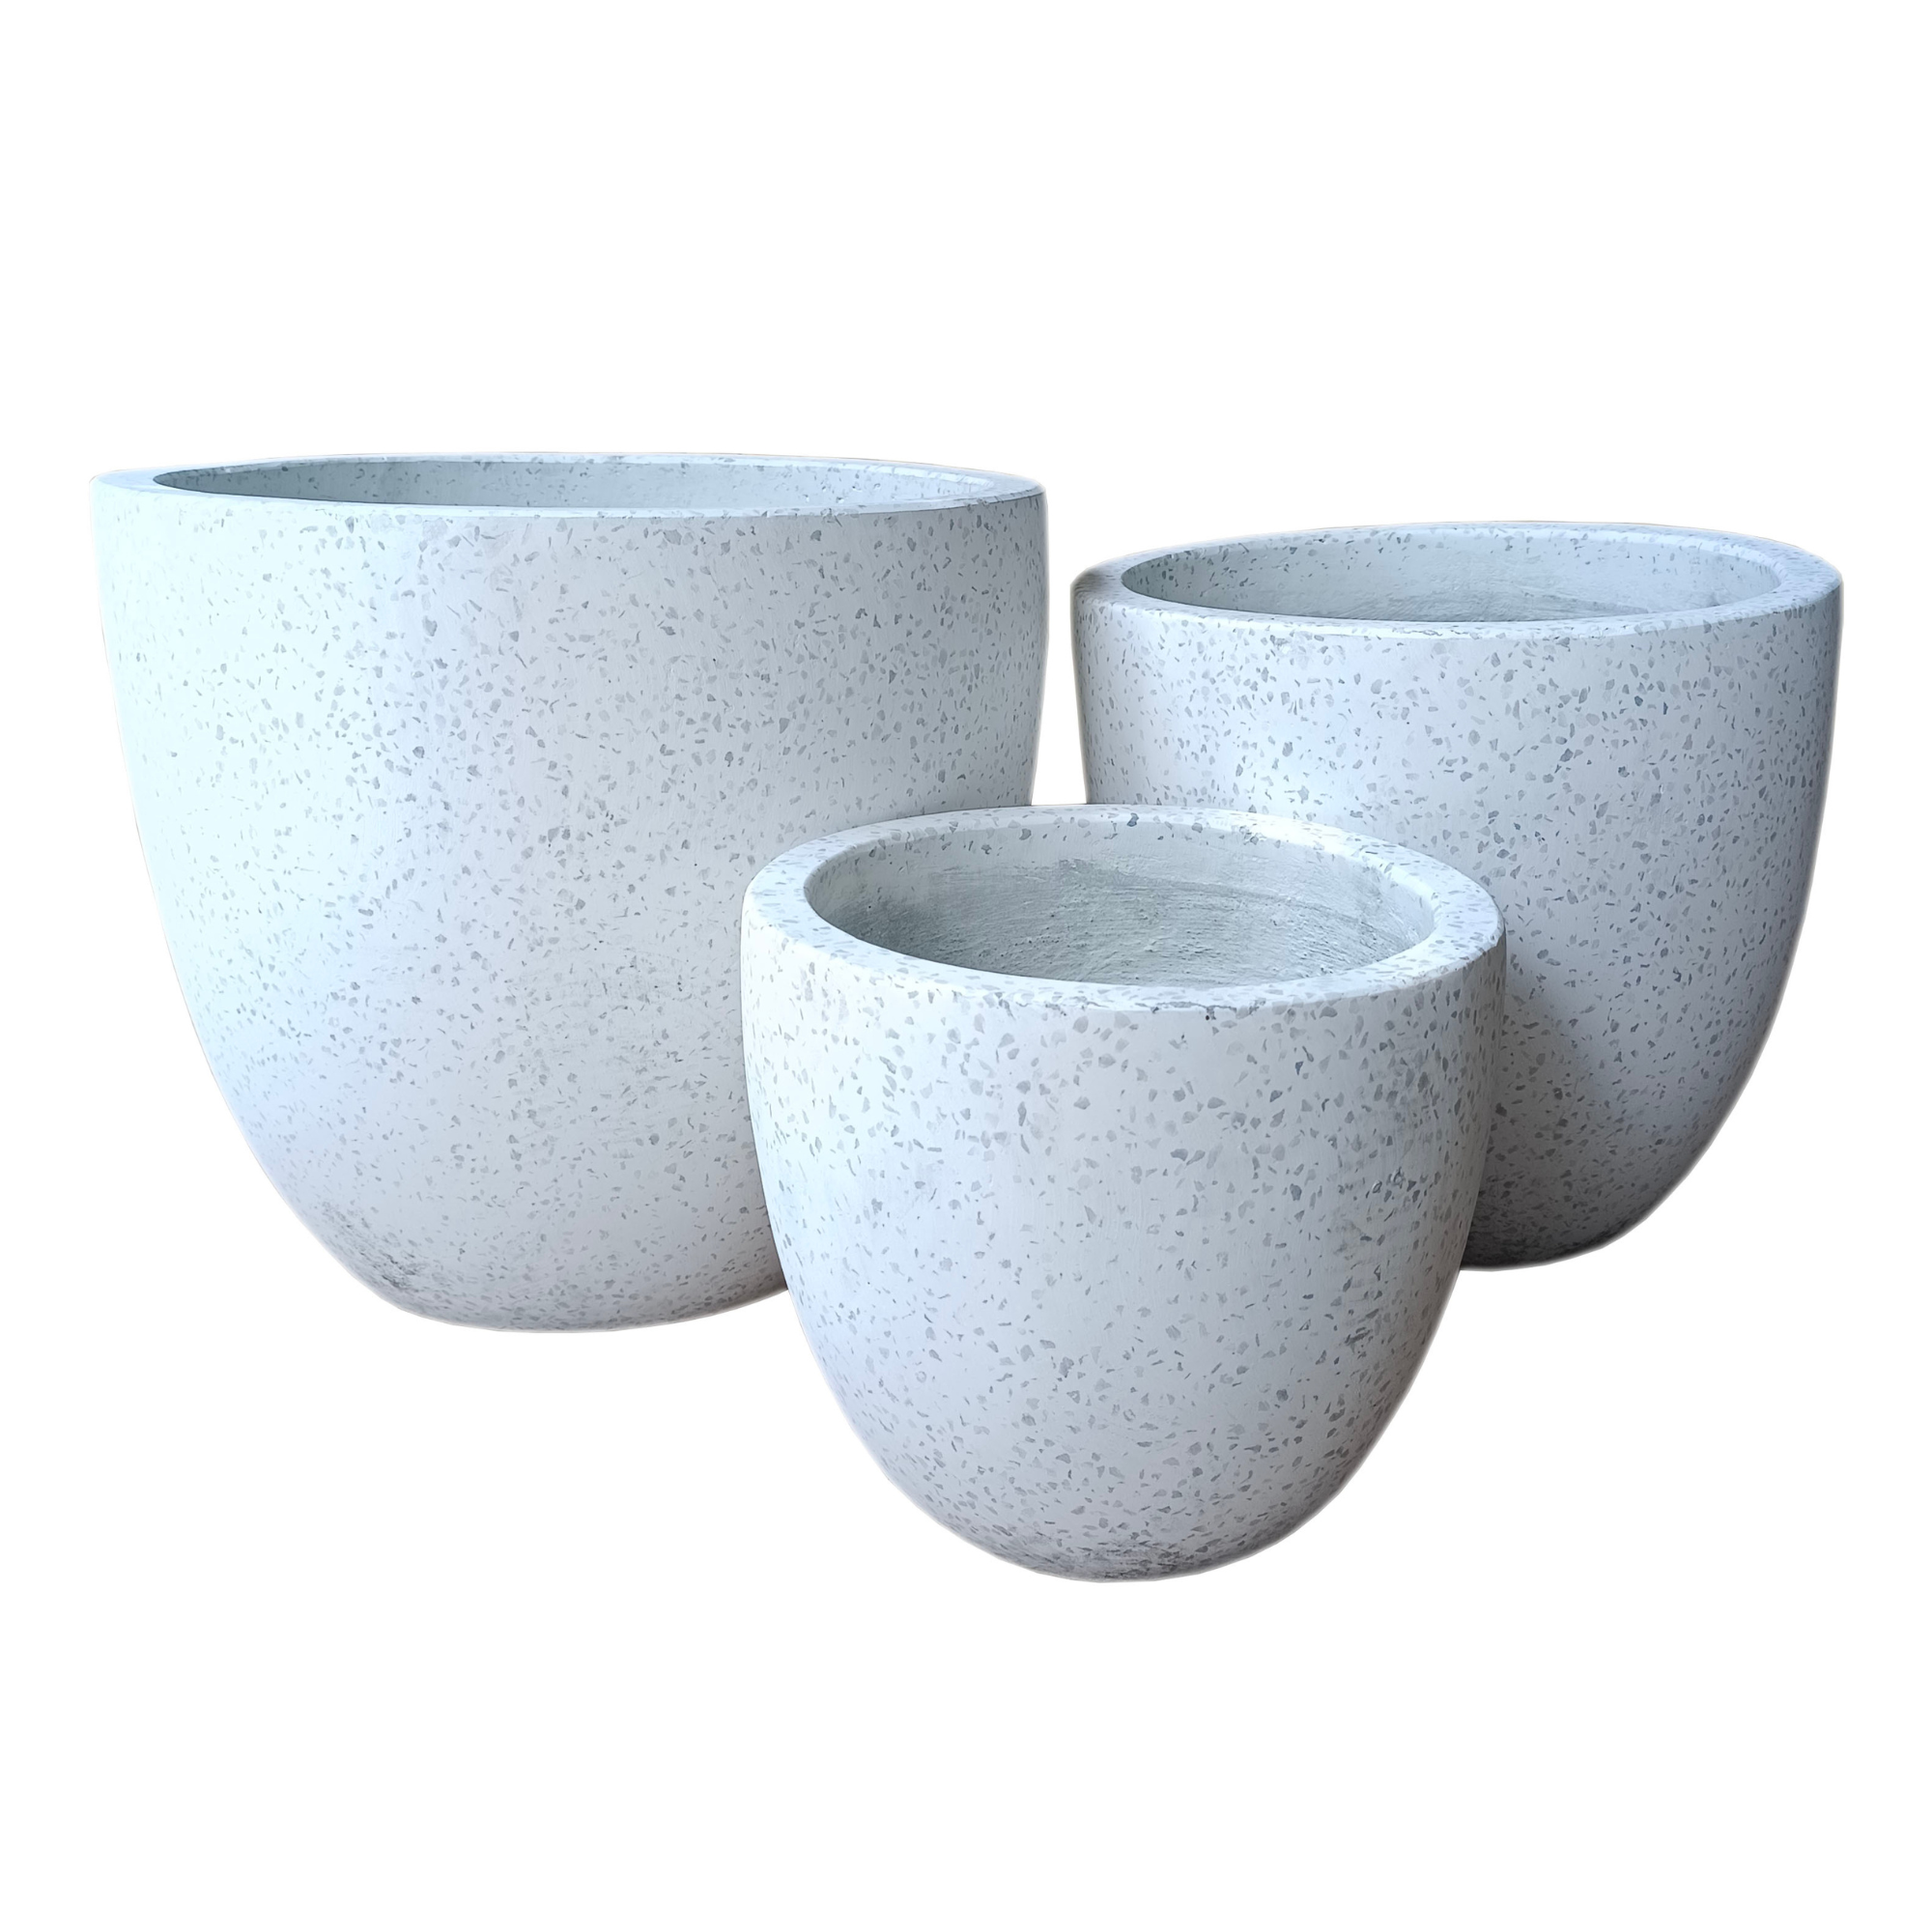 White Terrazzo Indoor/Outdoor Plant Pot By Roots36W*36D*32H.